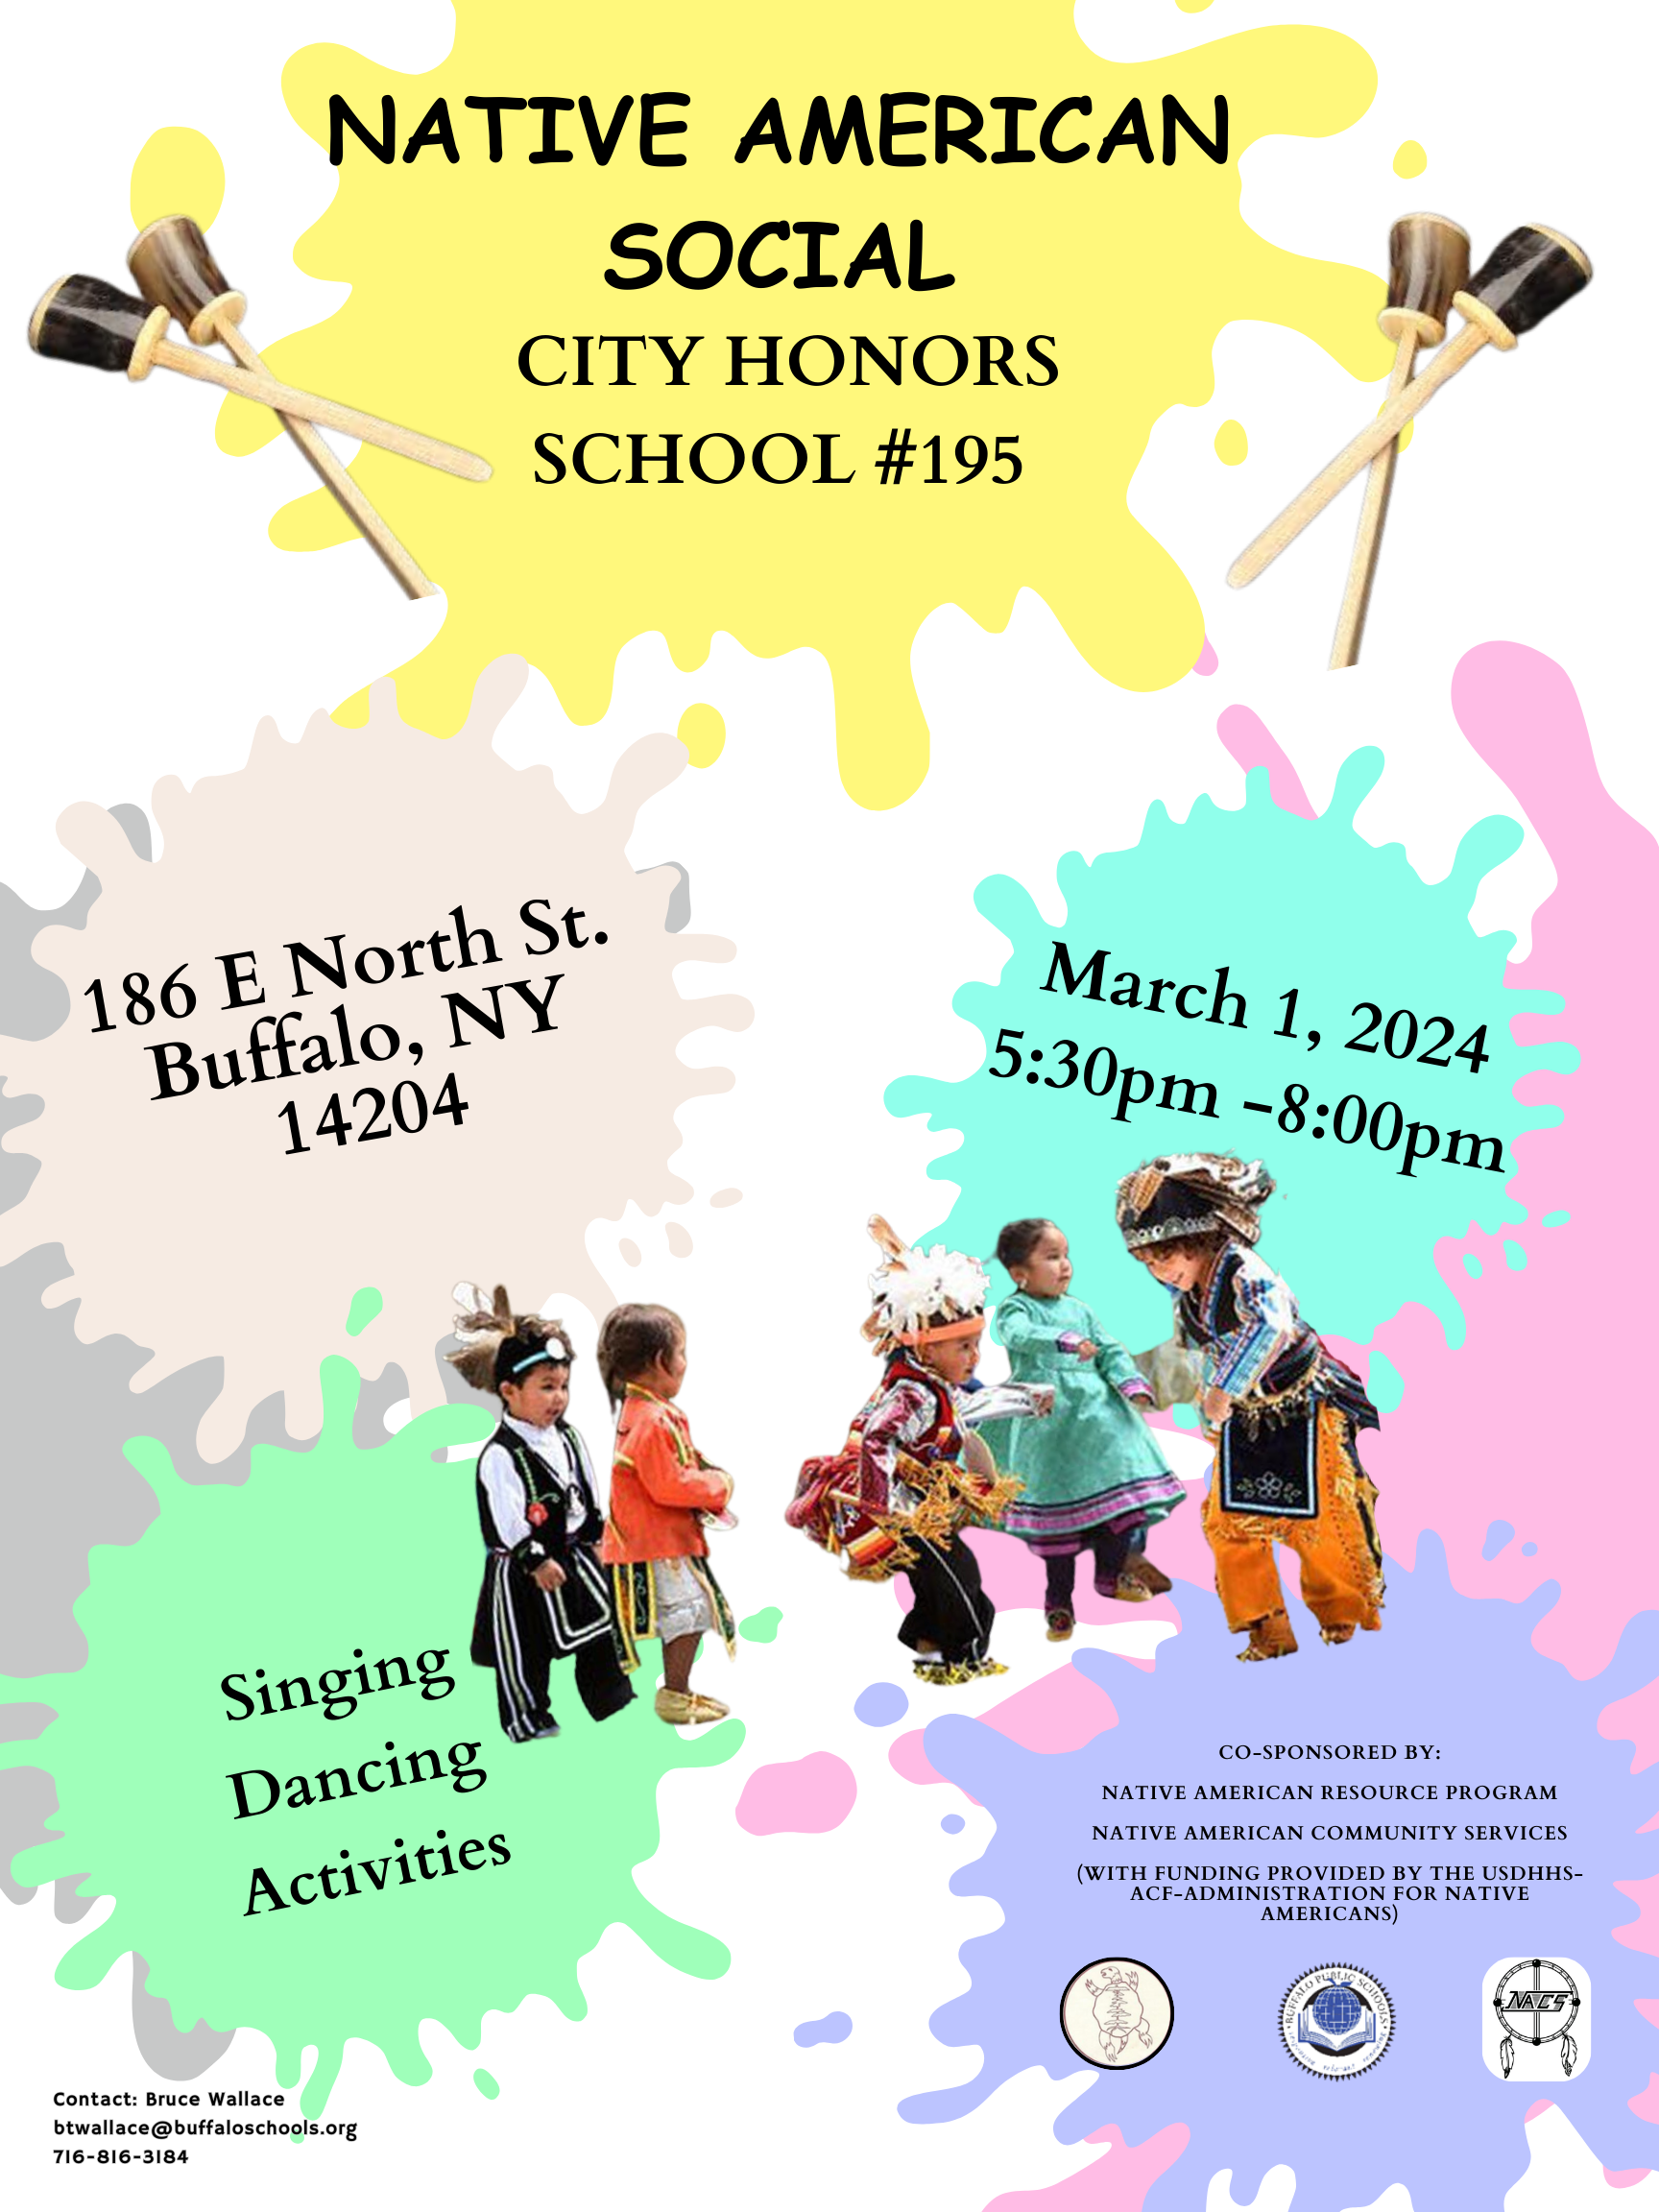 March 1, 2024  City Honors School. 186 E North St. Buffalo, NY 14204  Come join us for food, singing, and dancing!  Co-sponsored by: Native American Resource Program and Native American Community Services (with funding provided by the USDHHS--ACF Administration for Native Americans)  Contact: Bruce Wallace btwallace@buffaloschools.org 716-816-3183